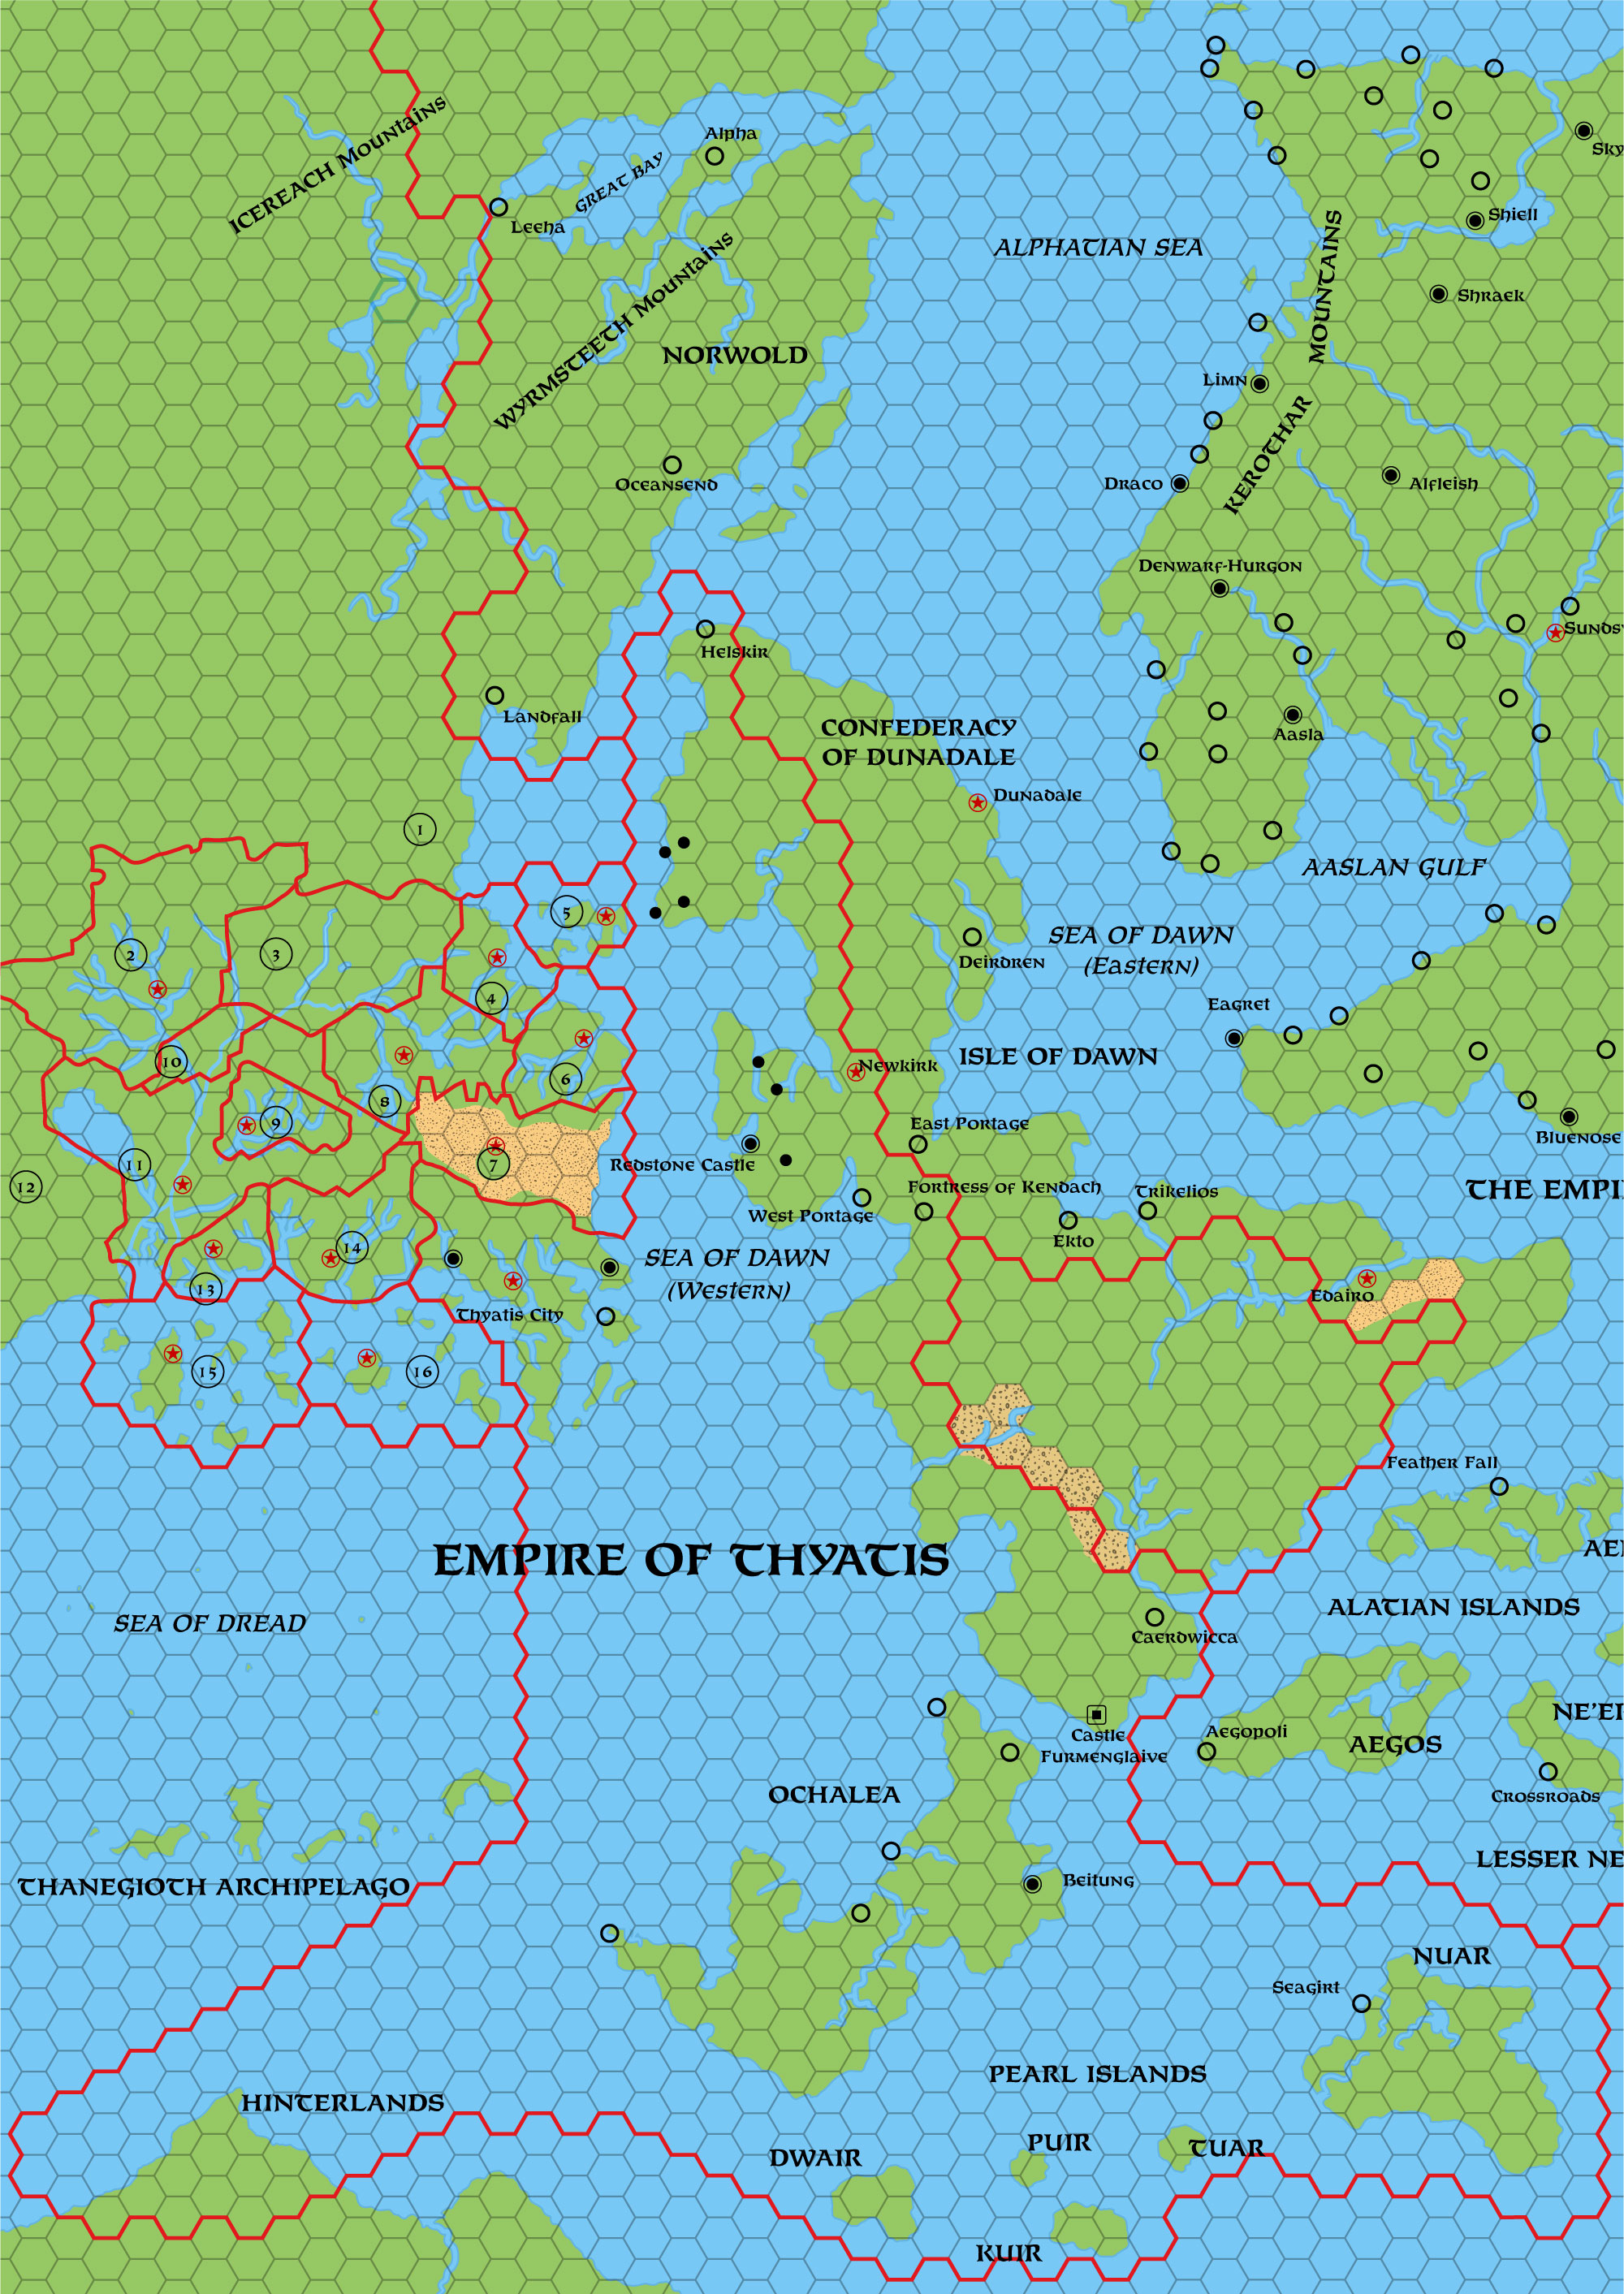 Colourised replica of Dawn of the Emperors’s overview map of the Empire of Thyatis, 72 miles per hex